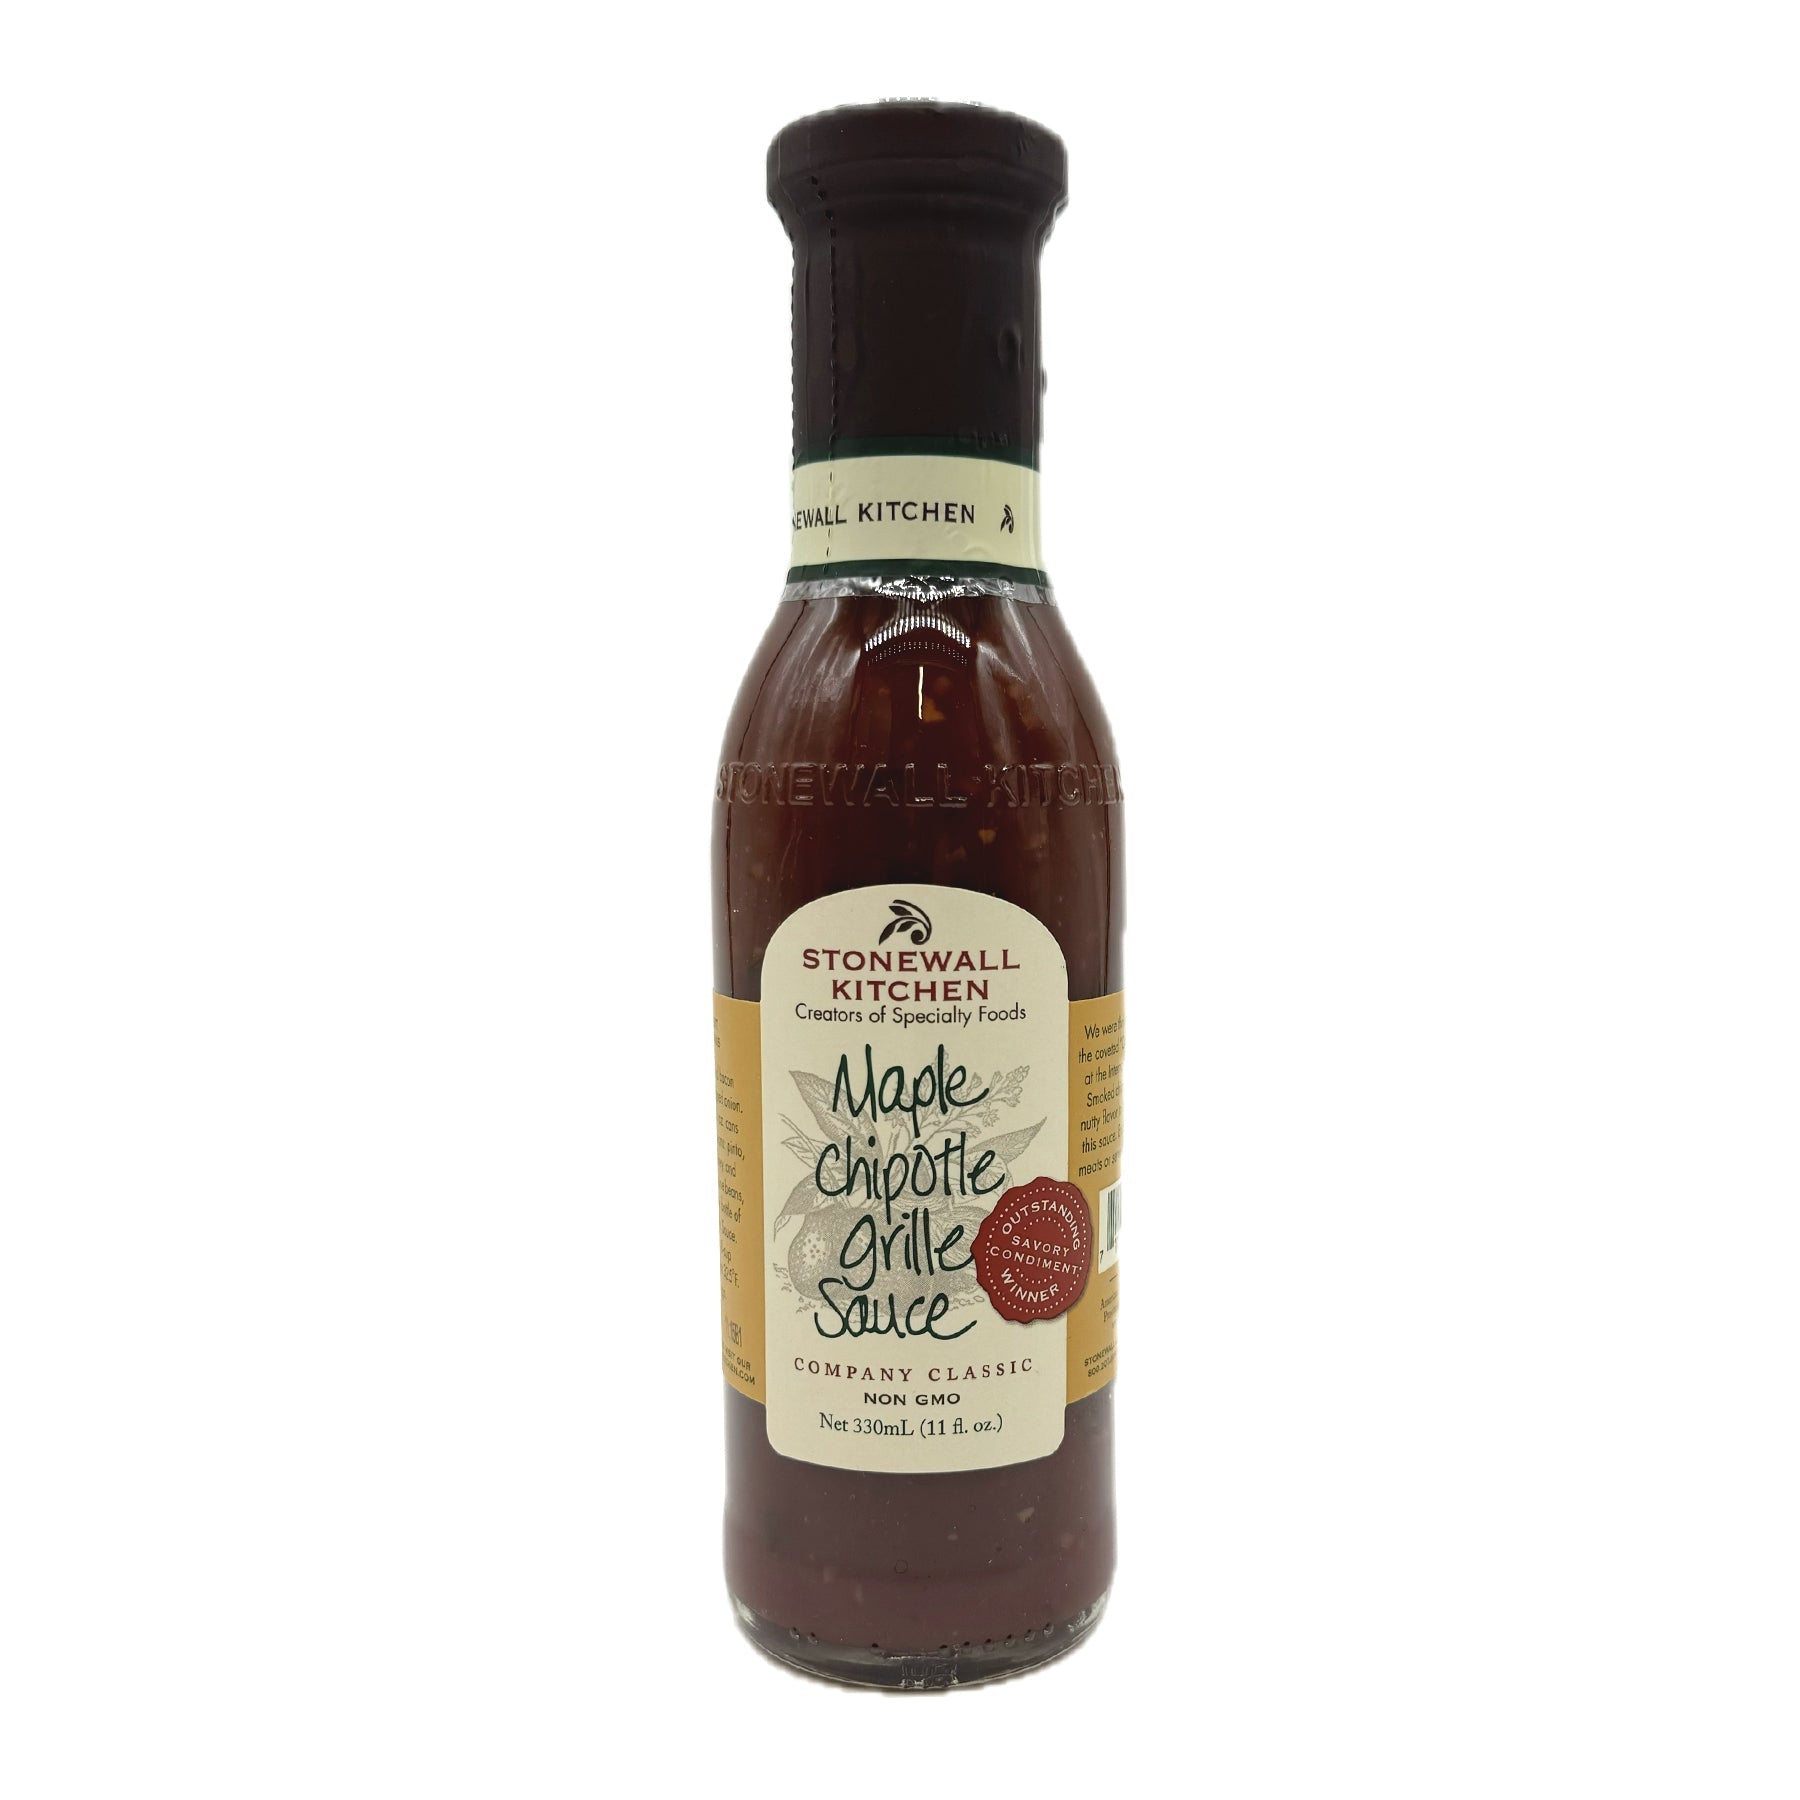 Maple Chipotle Grille Sauce - Genussbote